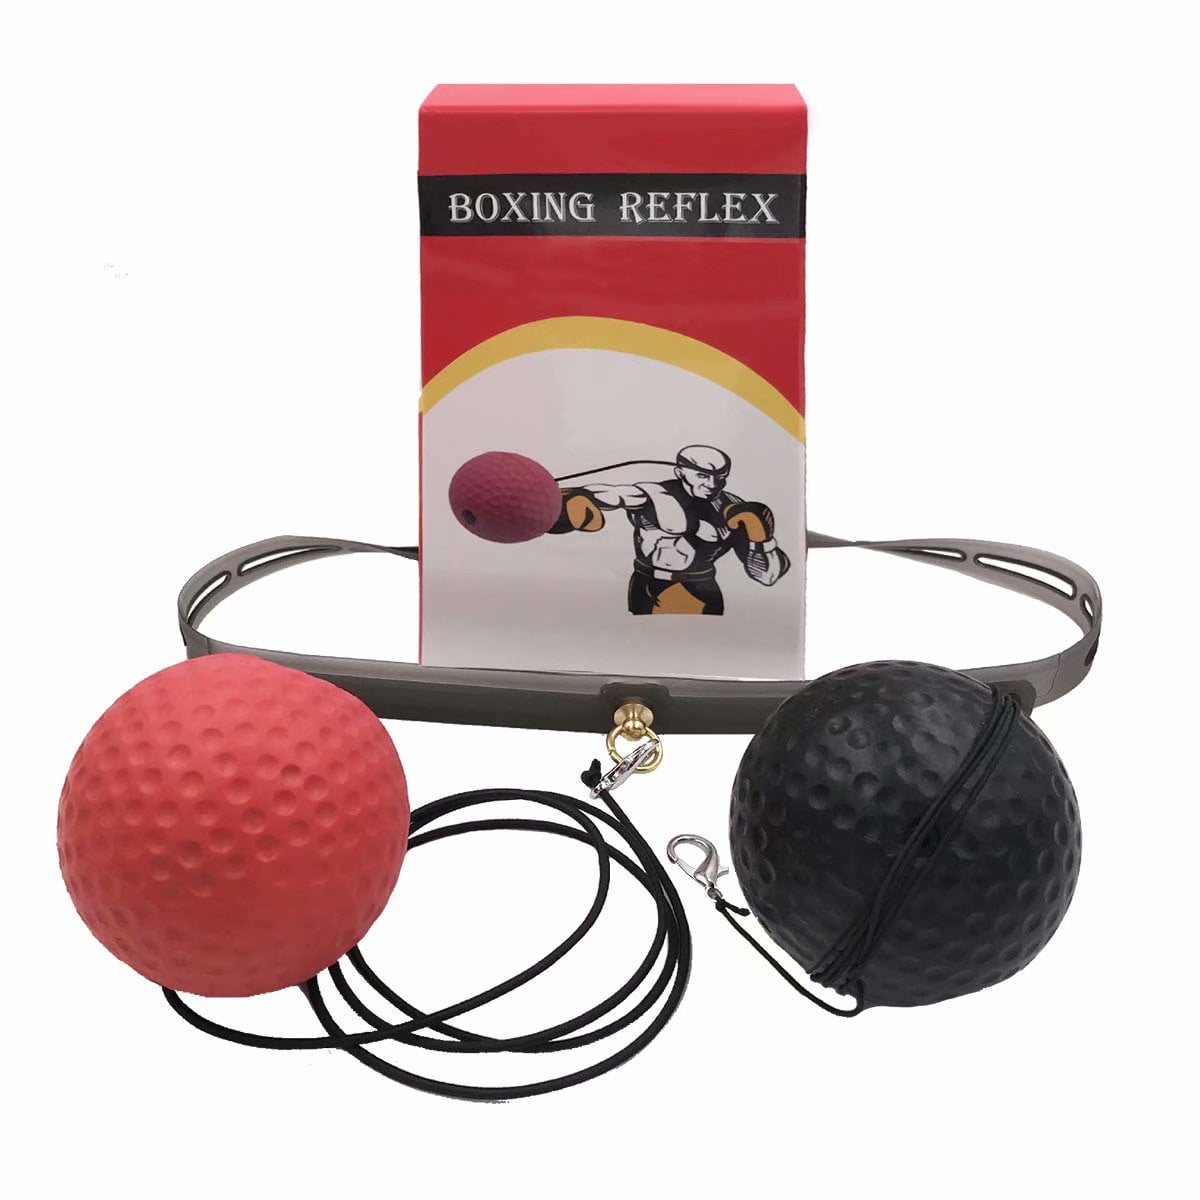 Suitable for Agility Reflex 2 Pcs High Density Rubber Foam Bounce and Boxing Reflex Ball Set with Headband Silicone Hexagonal Reaction Ball Boxing Equipment at Home and Coordination Training 